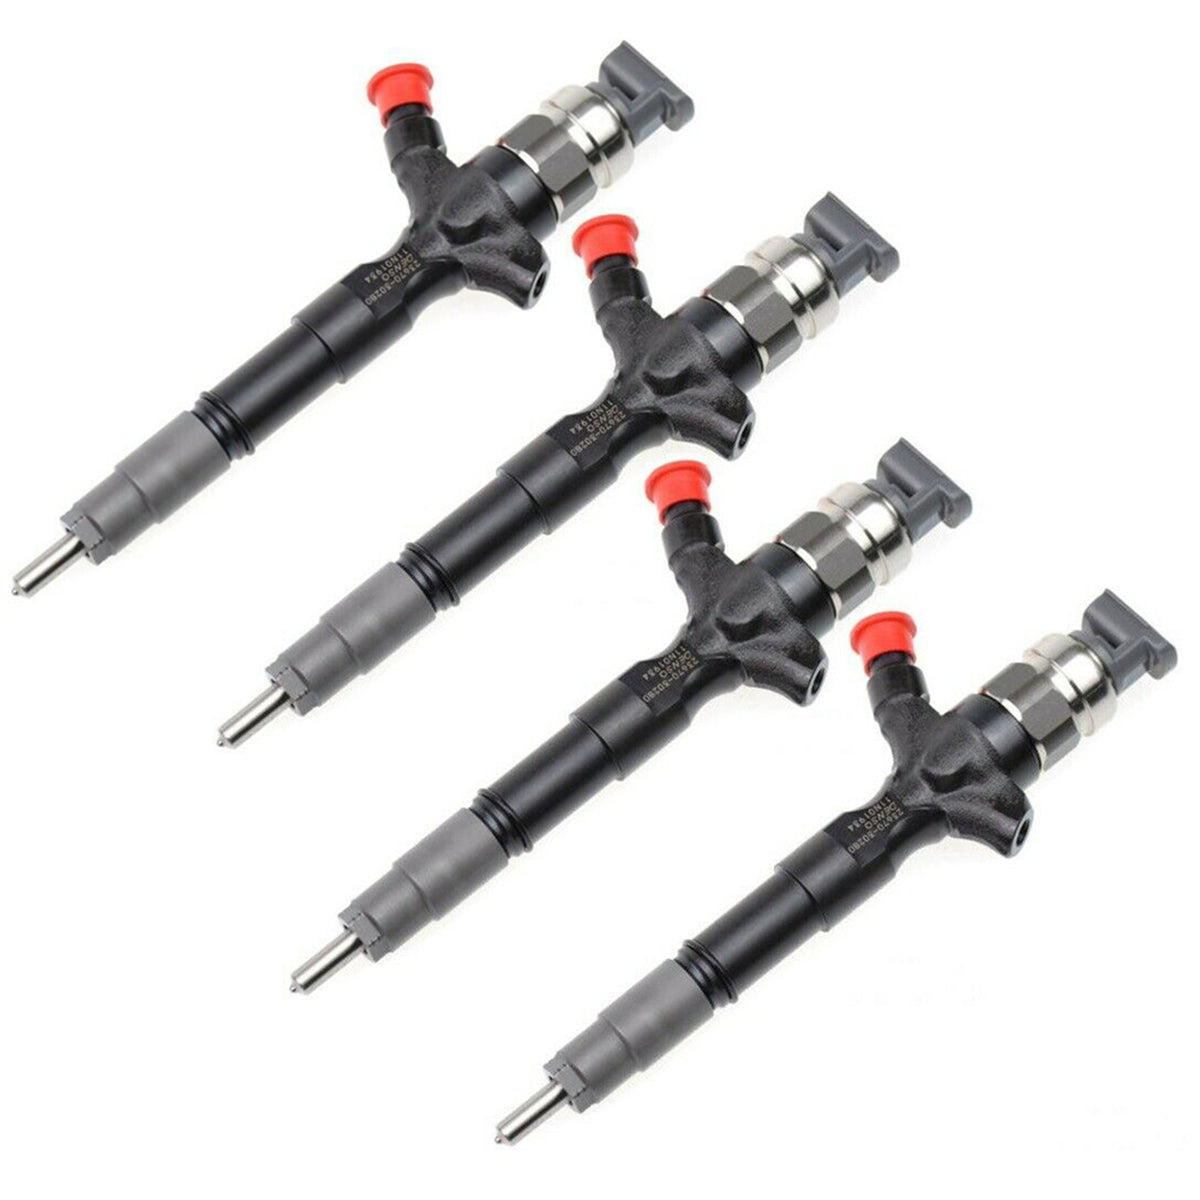 Fuel Injector 095000-7780, Fuel Injector for Toyota & Prado, Daysyore Fuel Injector, Car Fuel Injector, Auto Fuel Injector